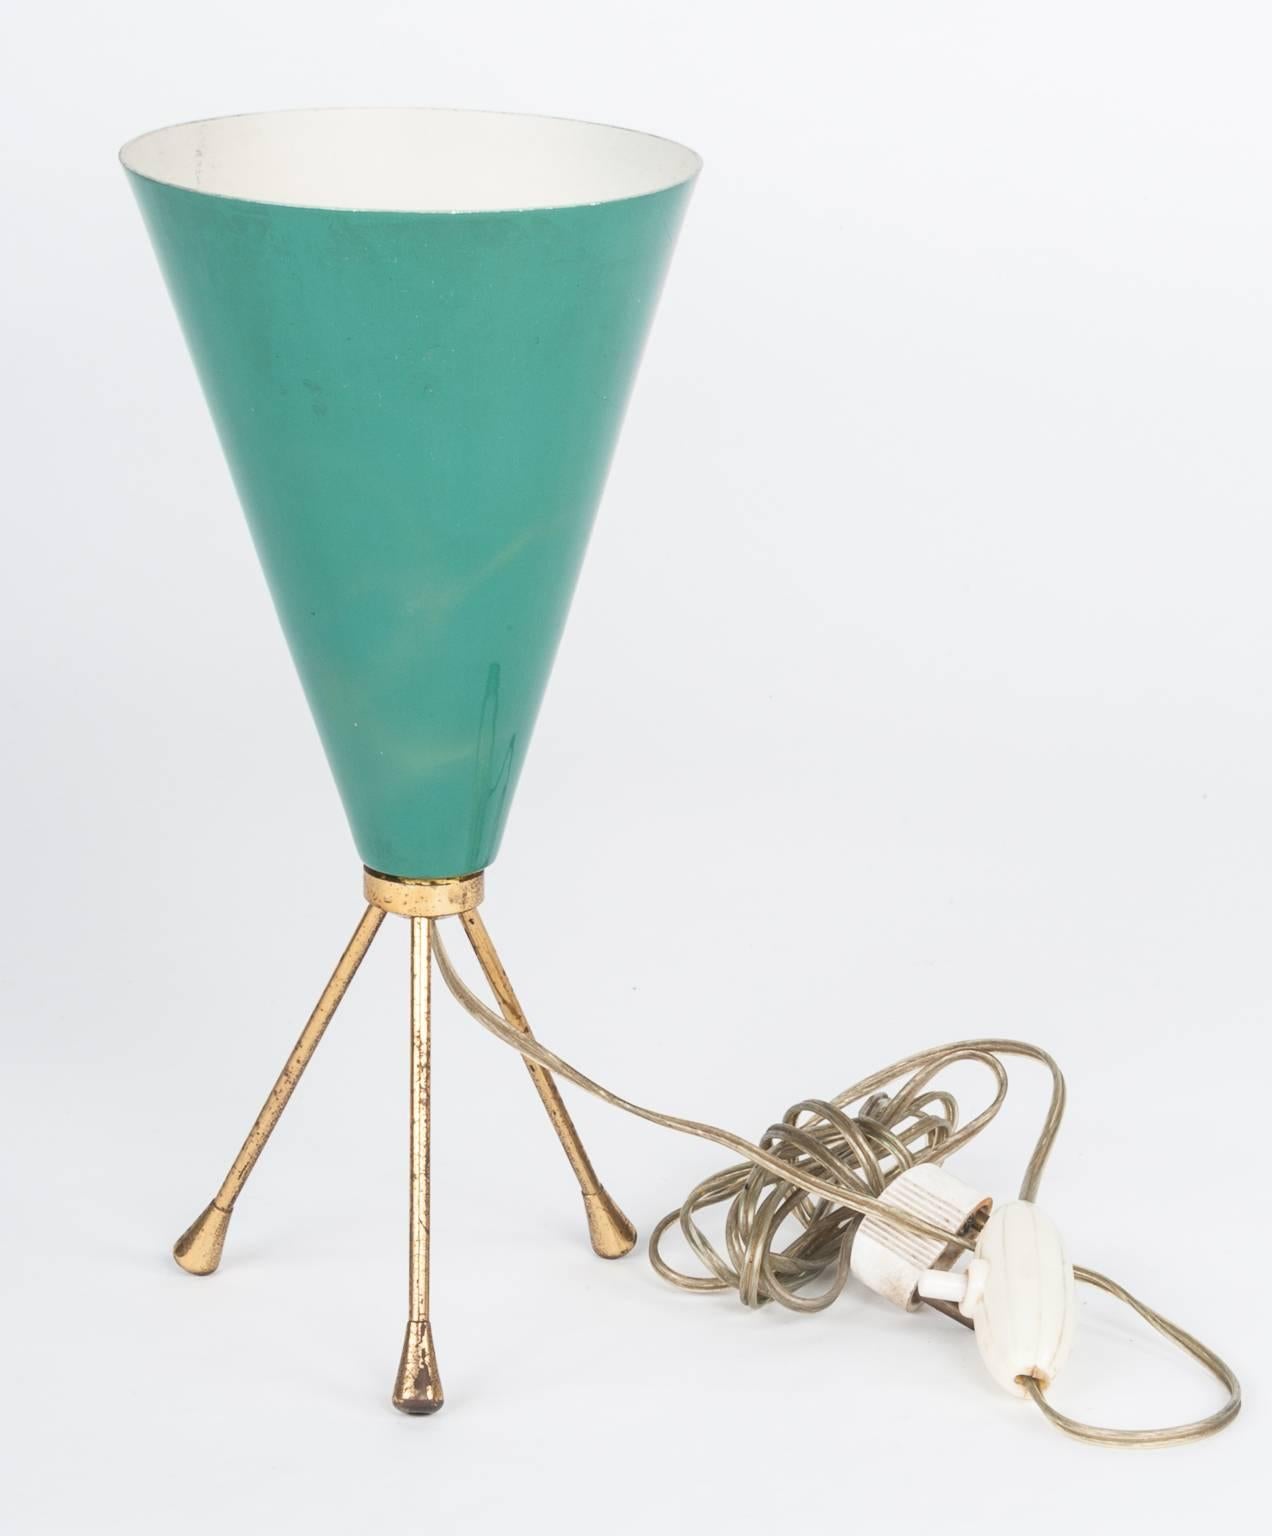 Italian midcentury table lamp uplighter by Stilnovo, Italy,  circa 1950
Enamelled Green Cone Shade Standing on a Brass Tripod Base
Retains original wiring, can be rewired if required